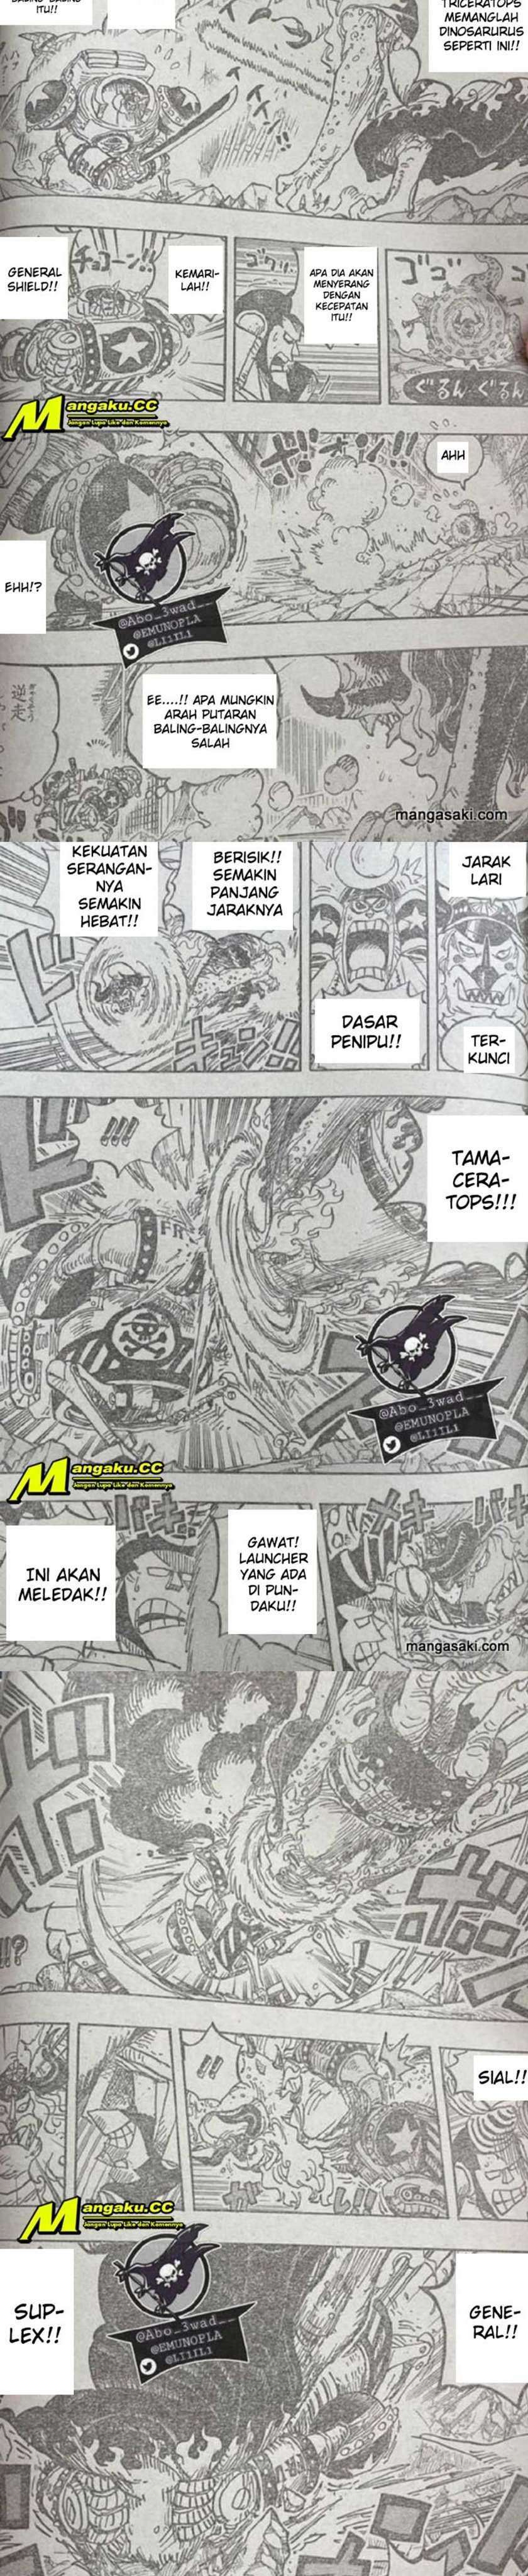 One Piece Chapter 1019 lq Image 2